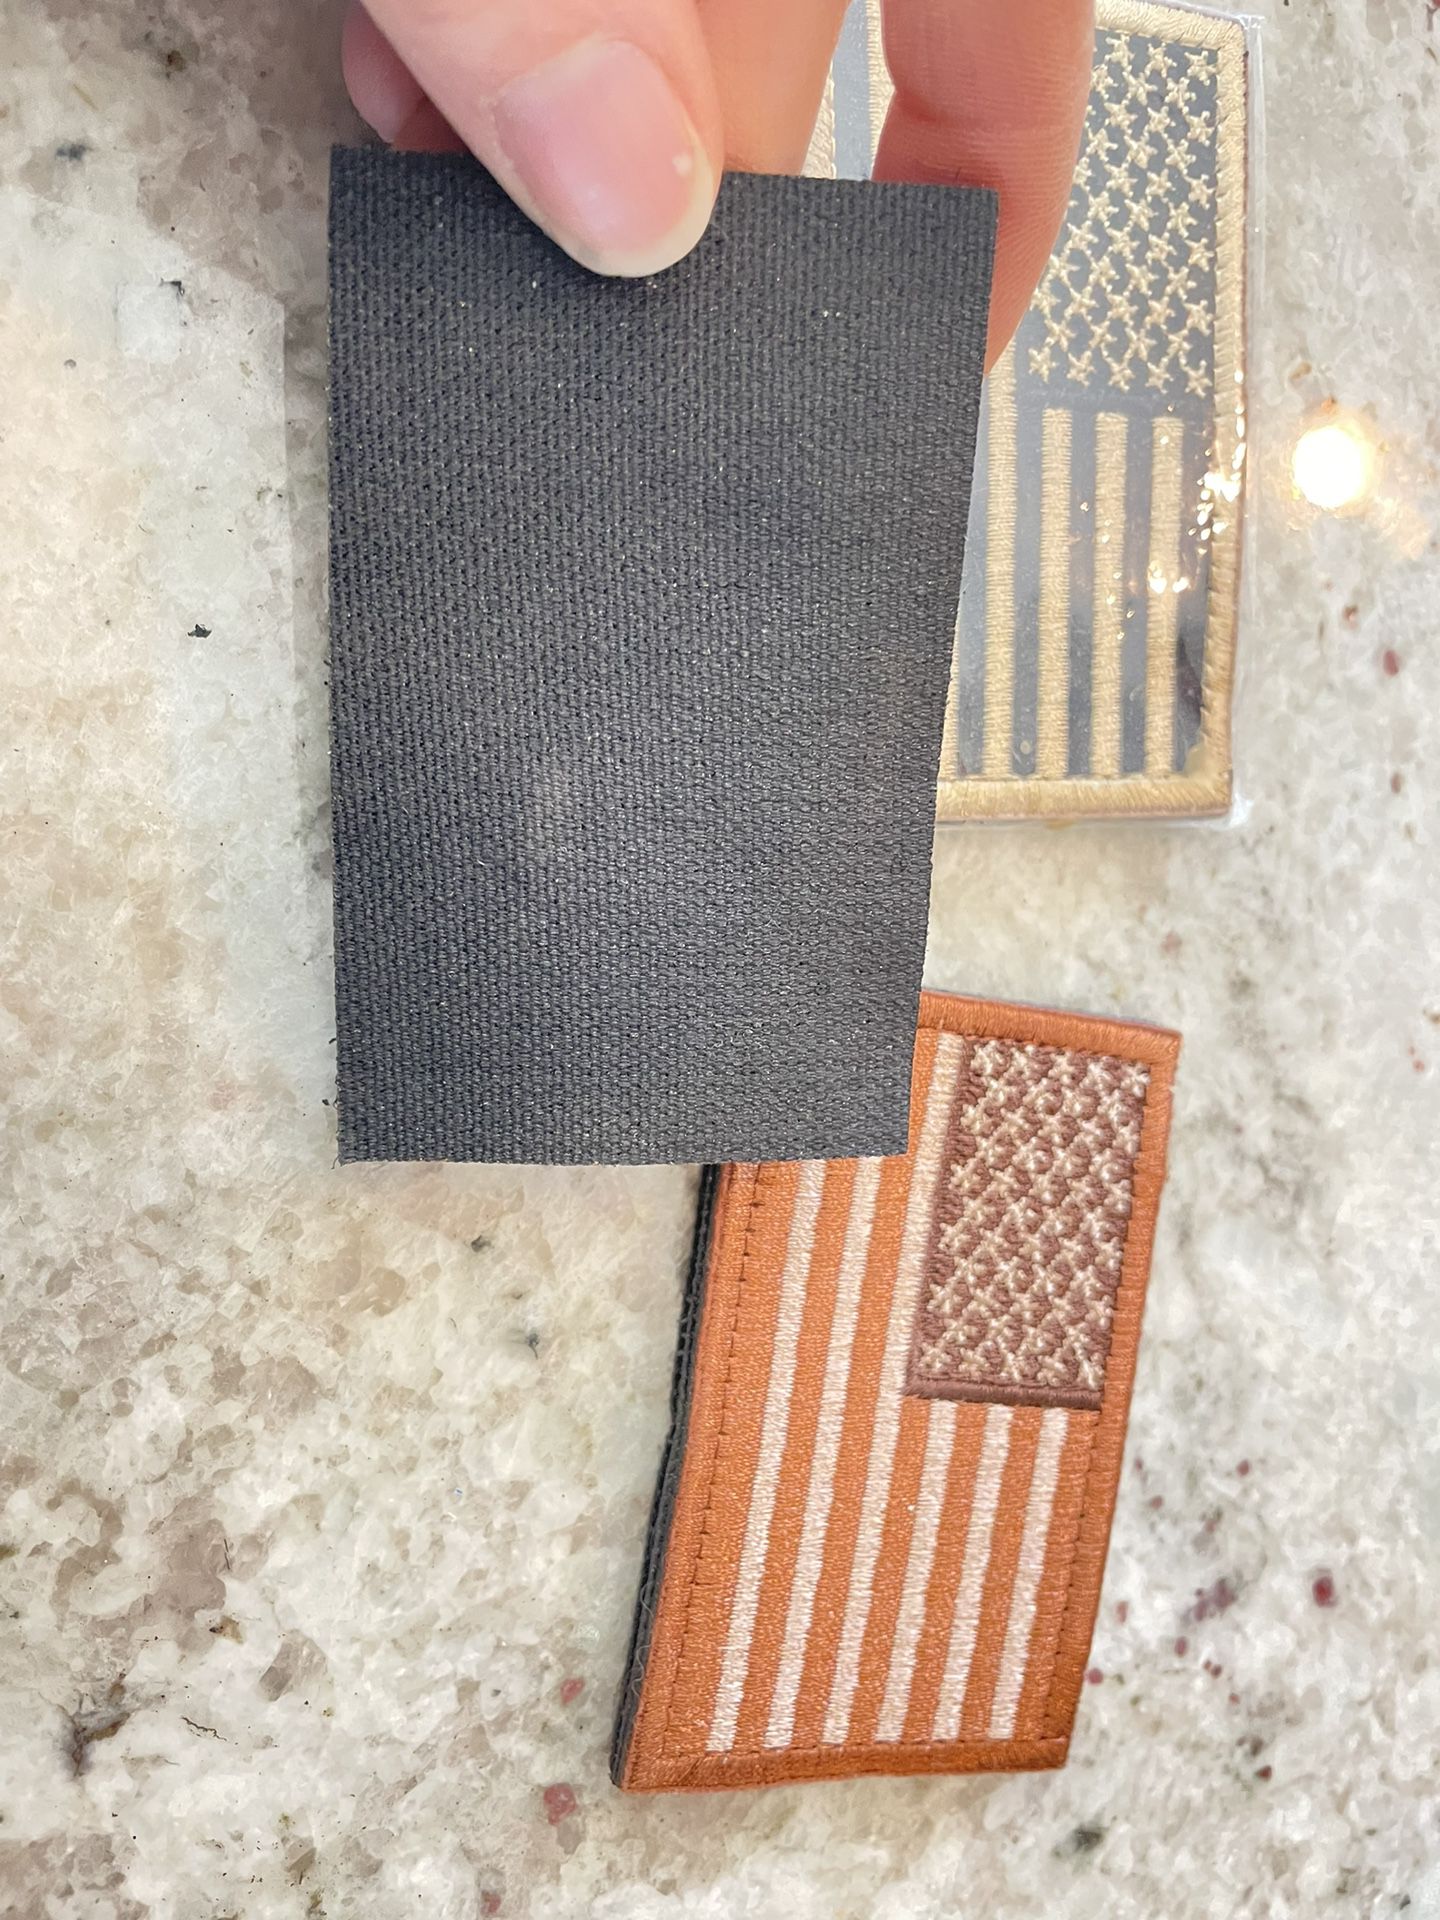 3x2 Inch American Flag Velcro Patches